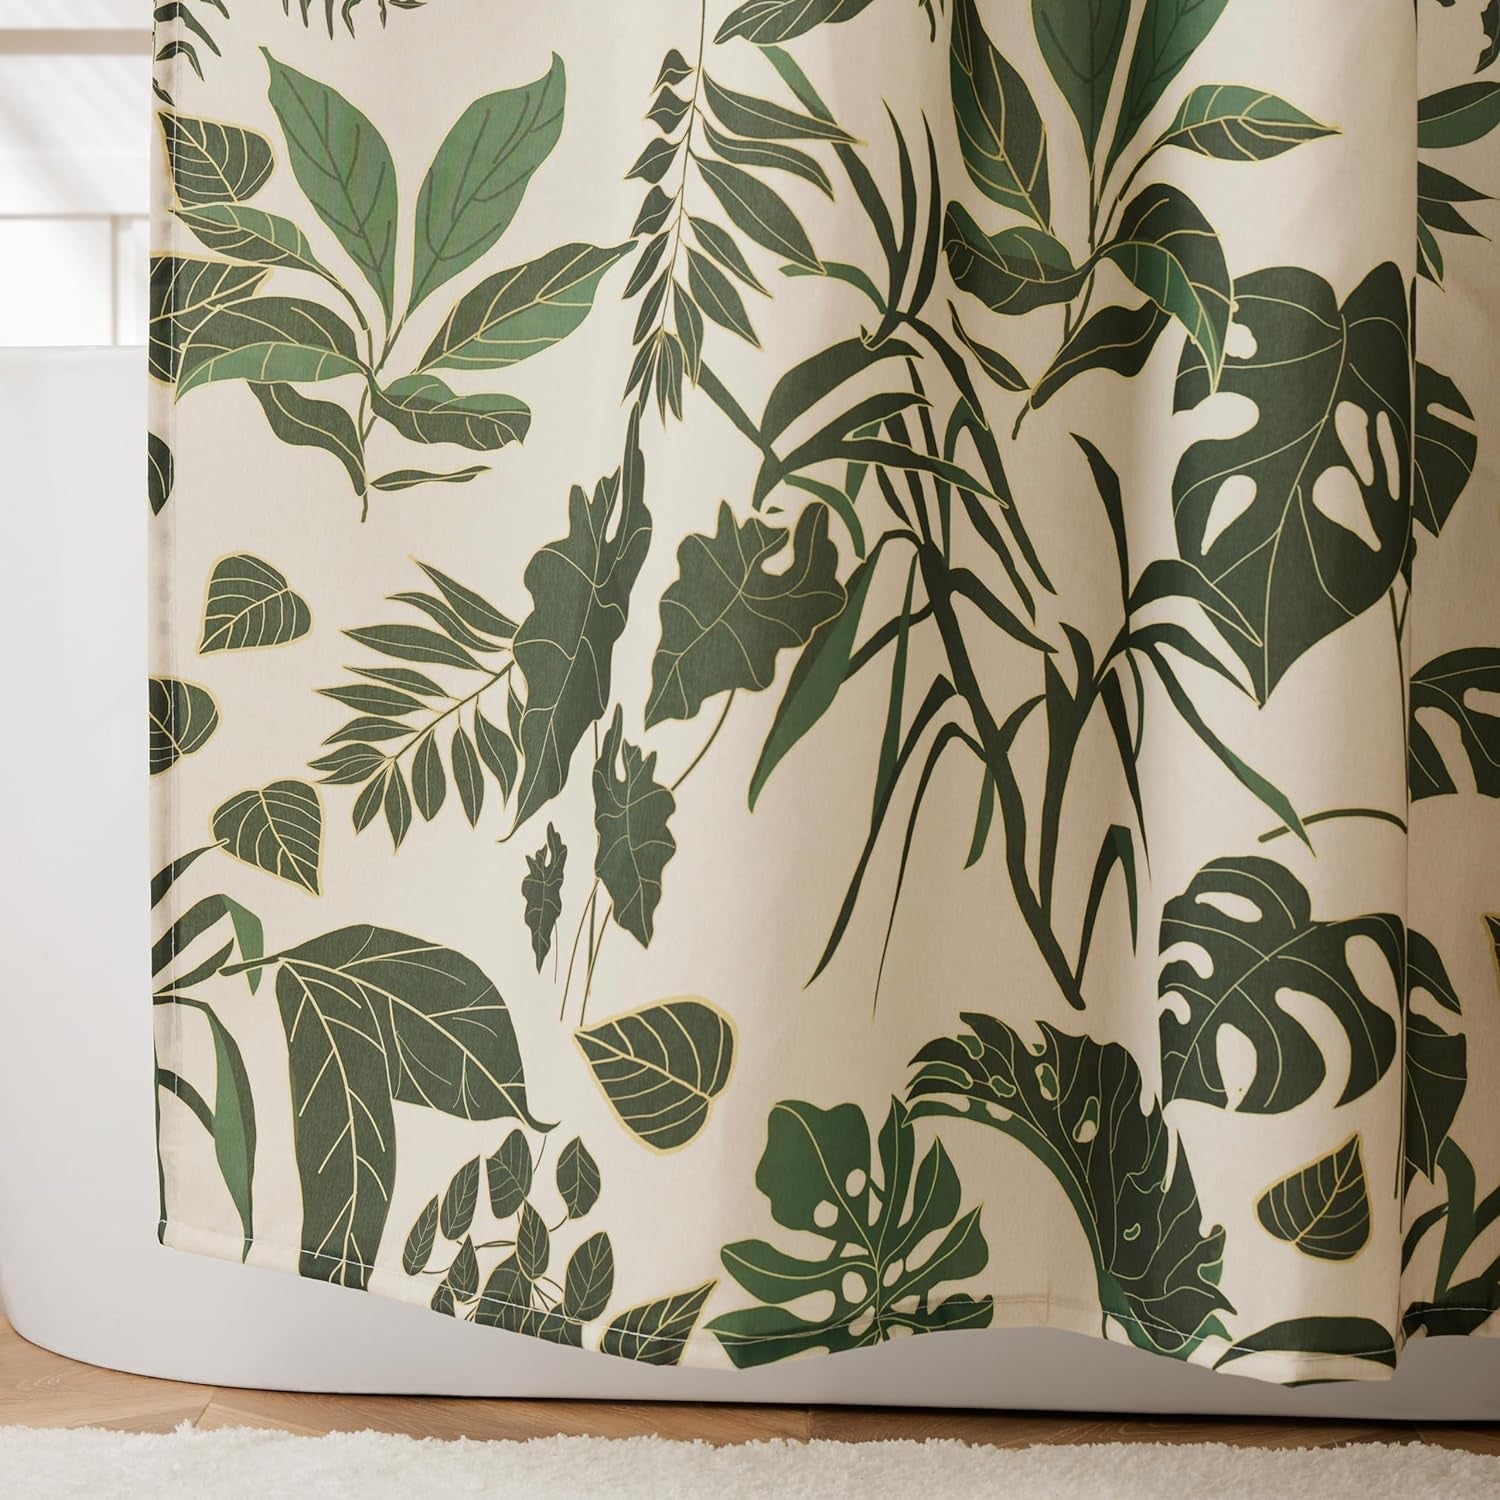 Boho Shower Curtain Green Shower Curtain Cute Floral Shower Curtains for Bathroom Allover Jungle Tropical Leaves Plant Shower Curtain Waterproof Polyester Fabric Shower Curtain 72X72 Inch